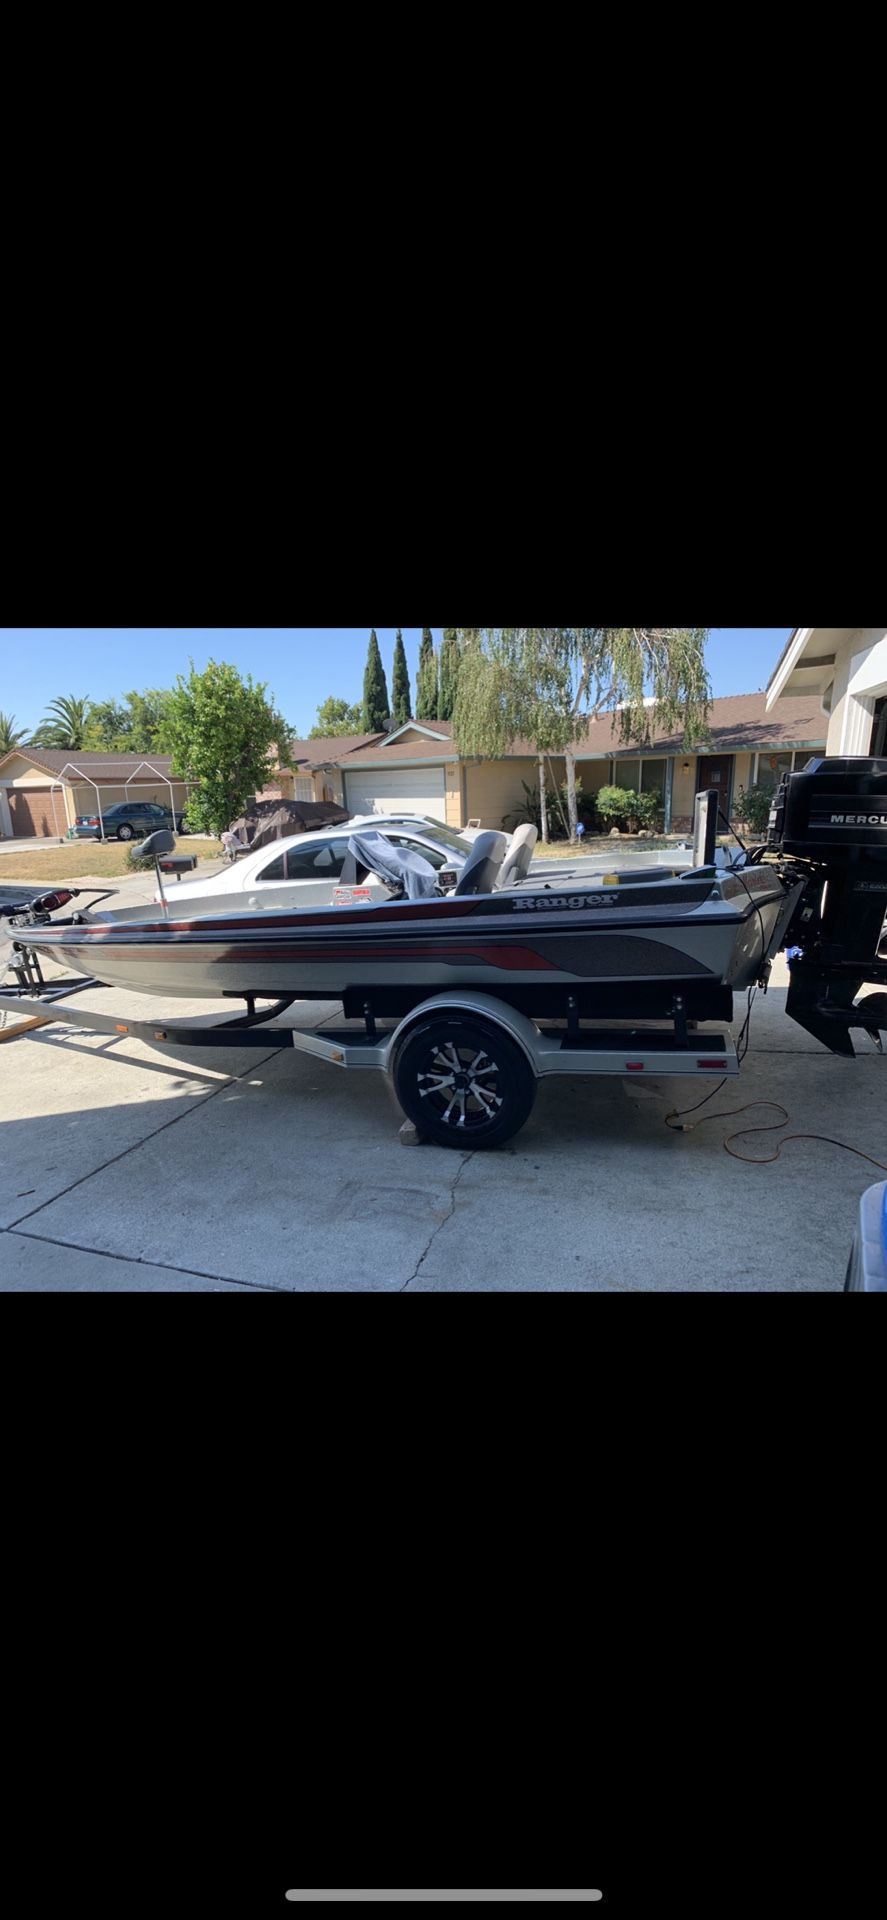 1986 18ft Ranger bass boat (rehauled) new carpet,custom built front deck (more walking space) super clean! w/trailer all registration up to date